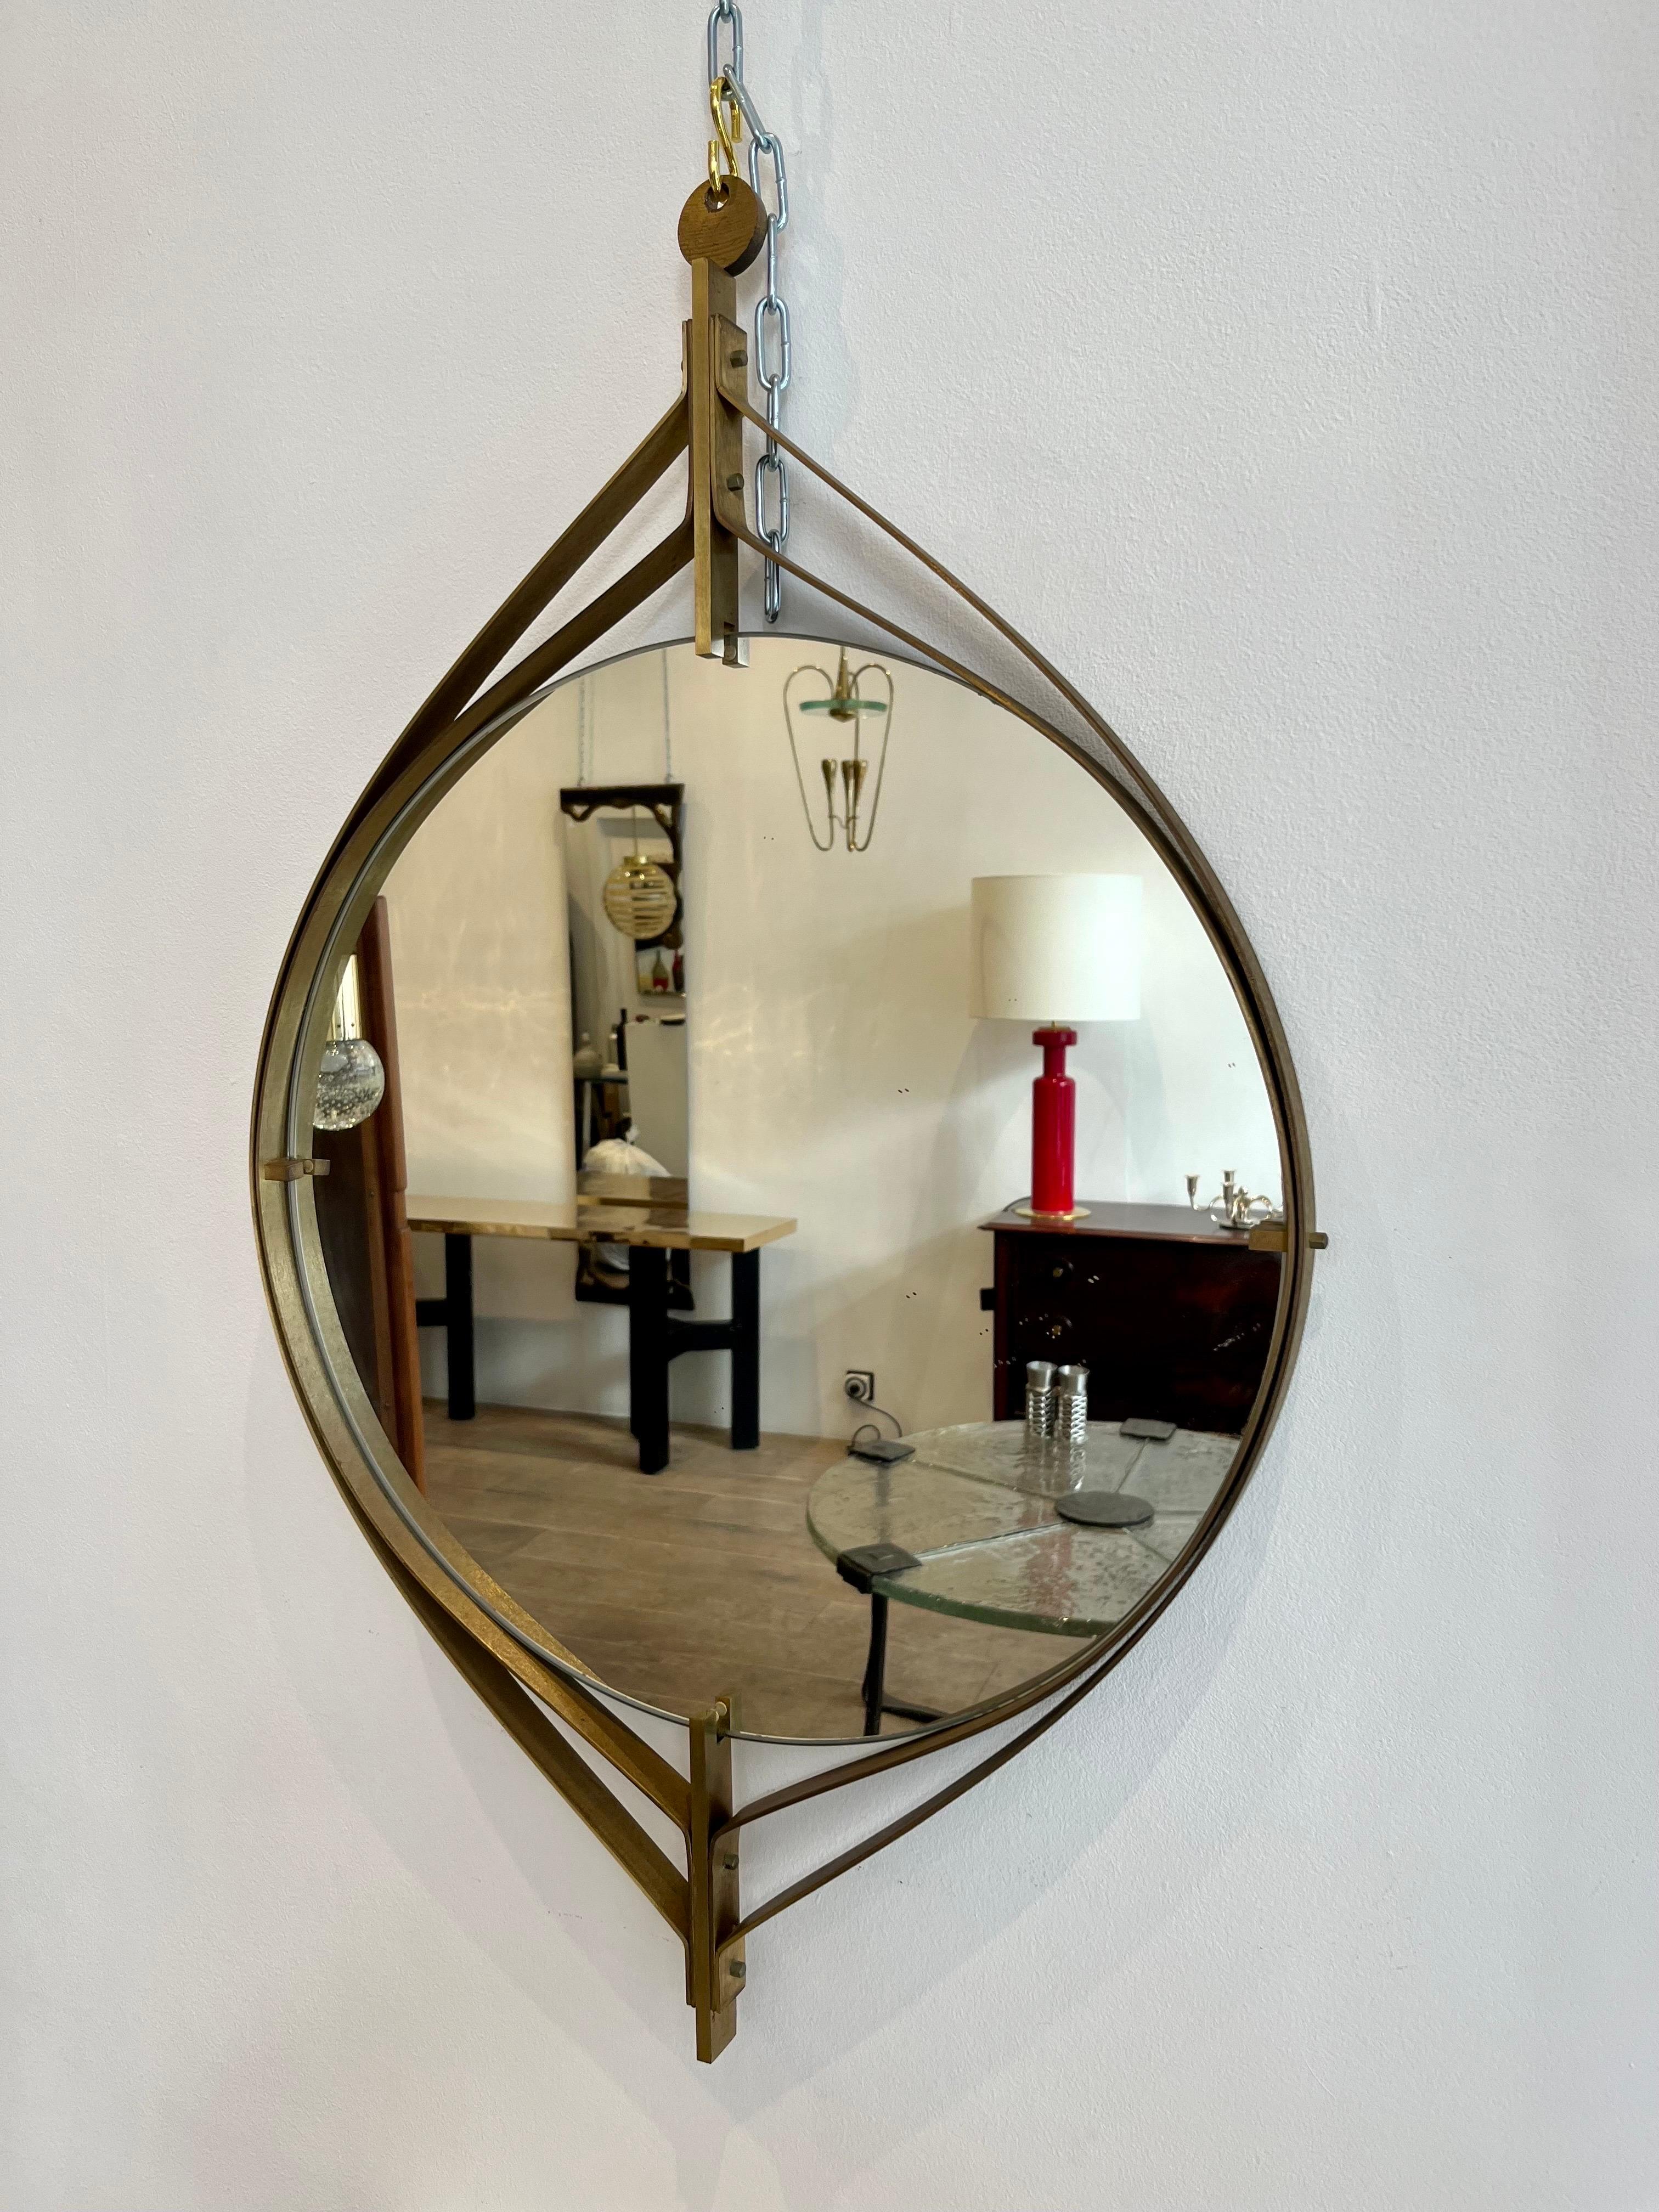 Luciano Frigerio is an Italian designer well active in the 1960s-70s. He designed elegant furniture in a brutalist chic style. The quality of his creations is quite excellent. The present mirror is made of brass. The design is abstract reminding the